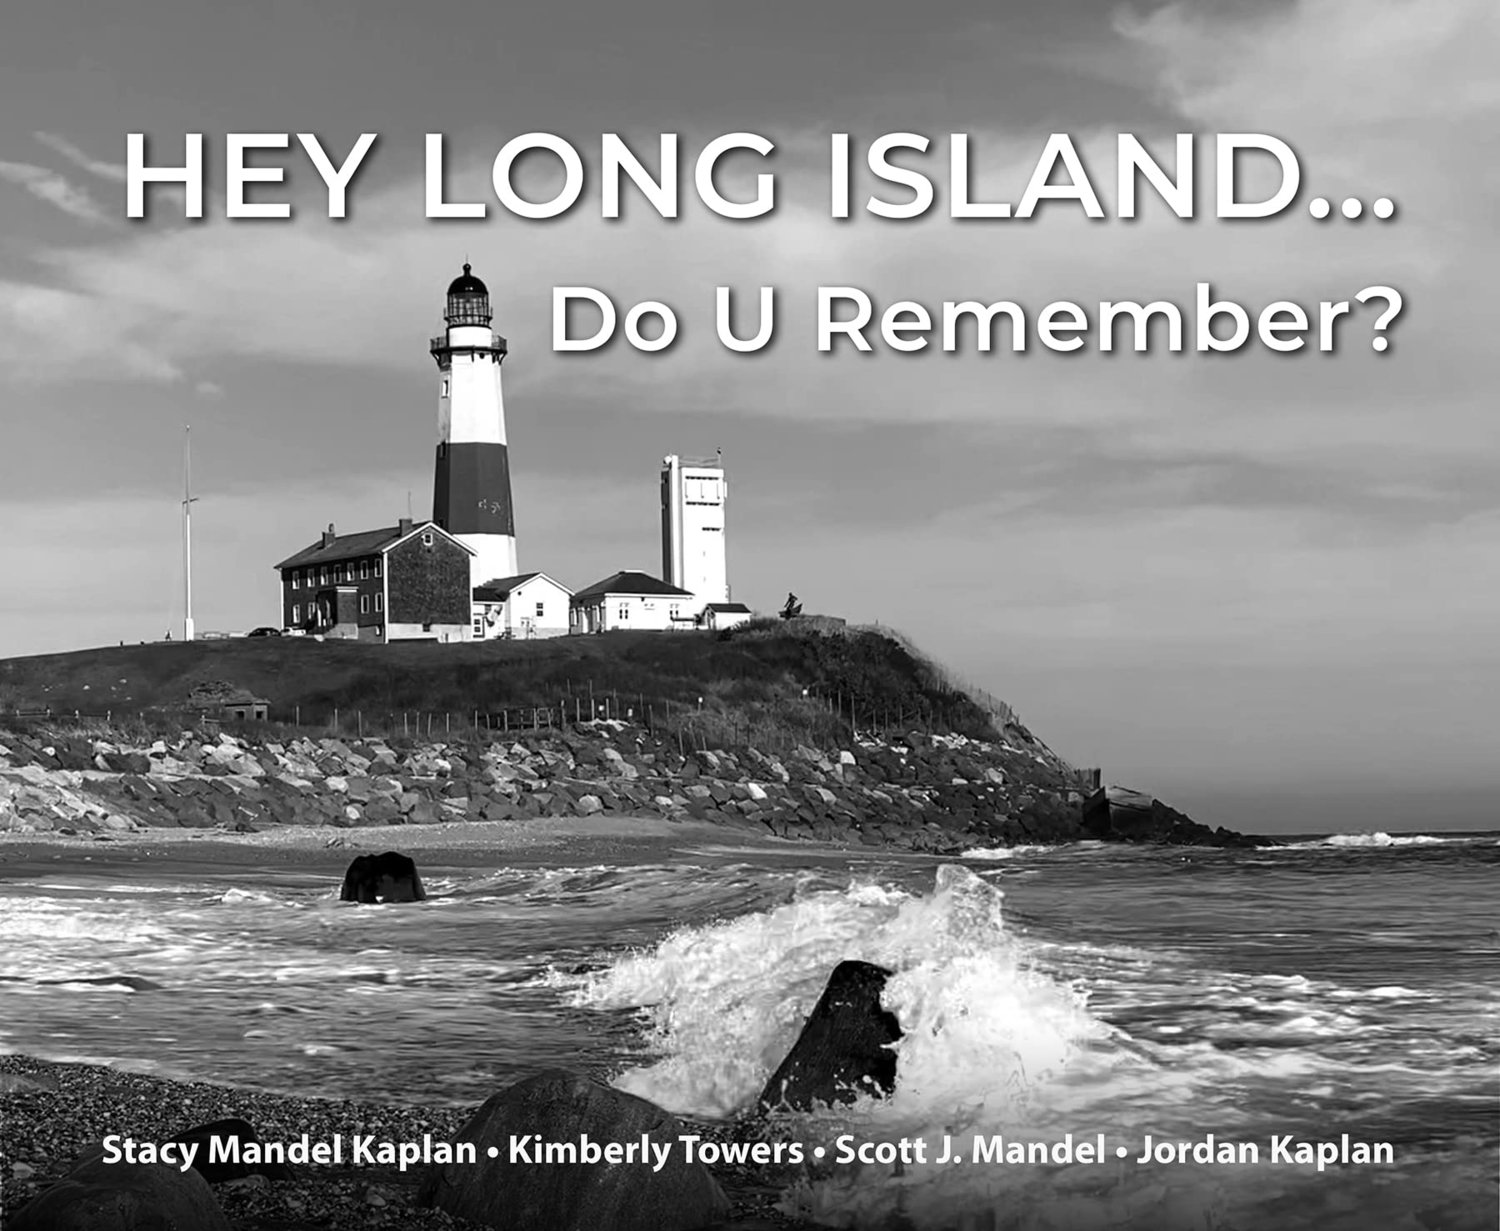 A new book, titled “Hey Long Island Do U Remember?,” tells stories about the island’s history.